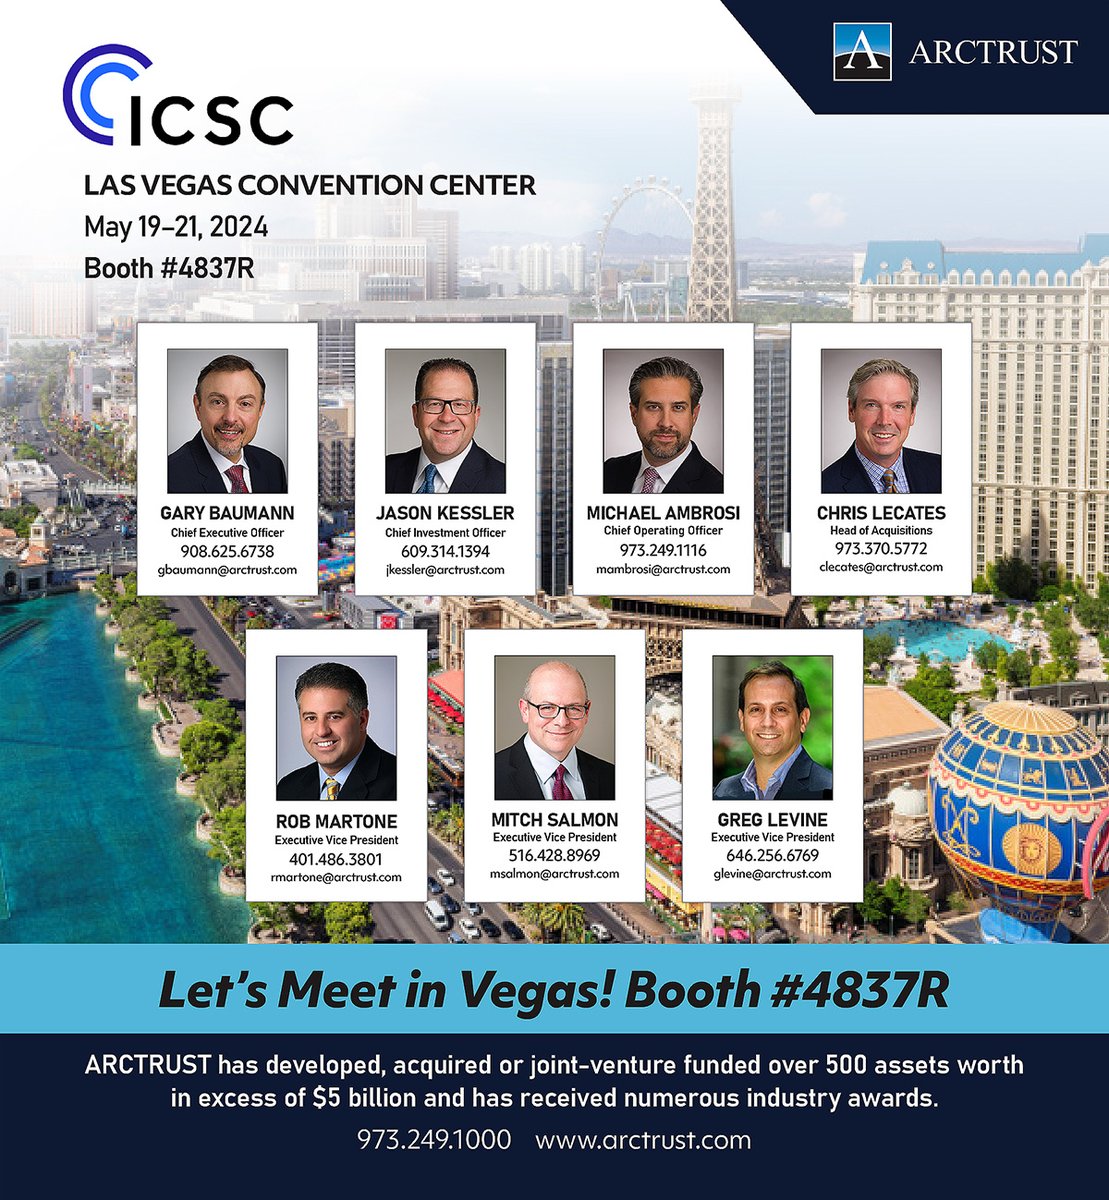 Meet ARCTRUST at ICSC VEGAS at the Las Vegas Convention Center!

For more info:

The Acquisitions Team
deals@arctrust.com
973.249.1000

@ARCTRUST1 #ARCTRUST #icsc #realestate #commercialrealestate #cre #realestateinvestment #investing #investmentproperty #retailrealestate #NNN